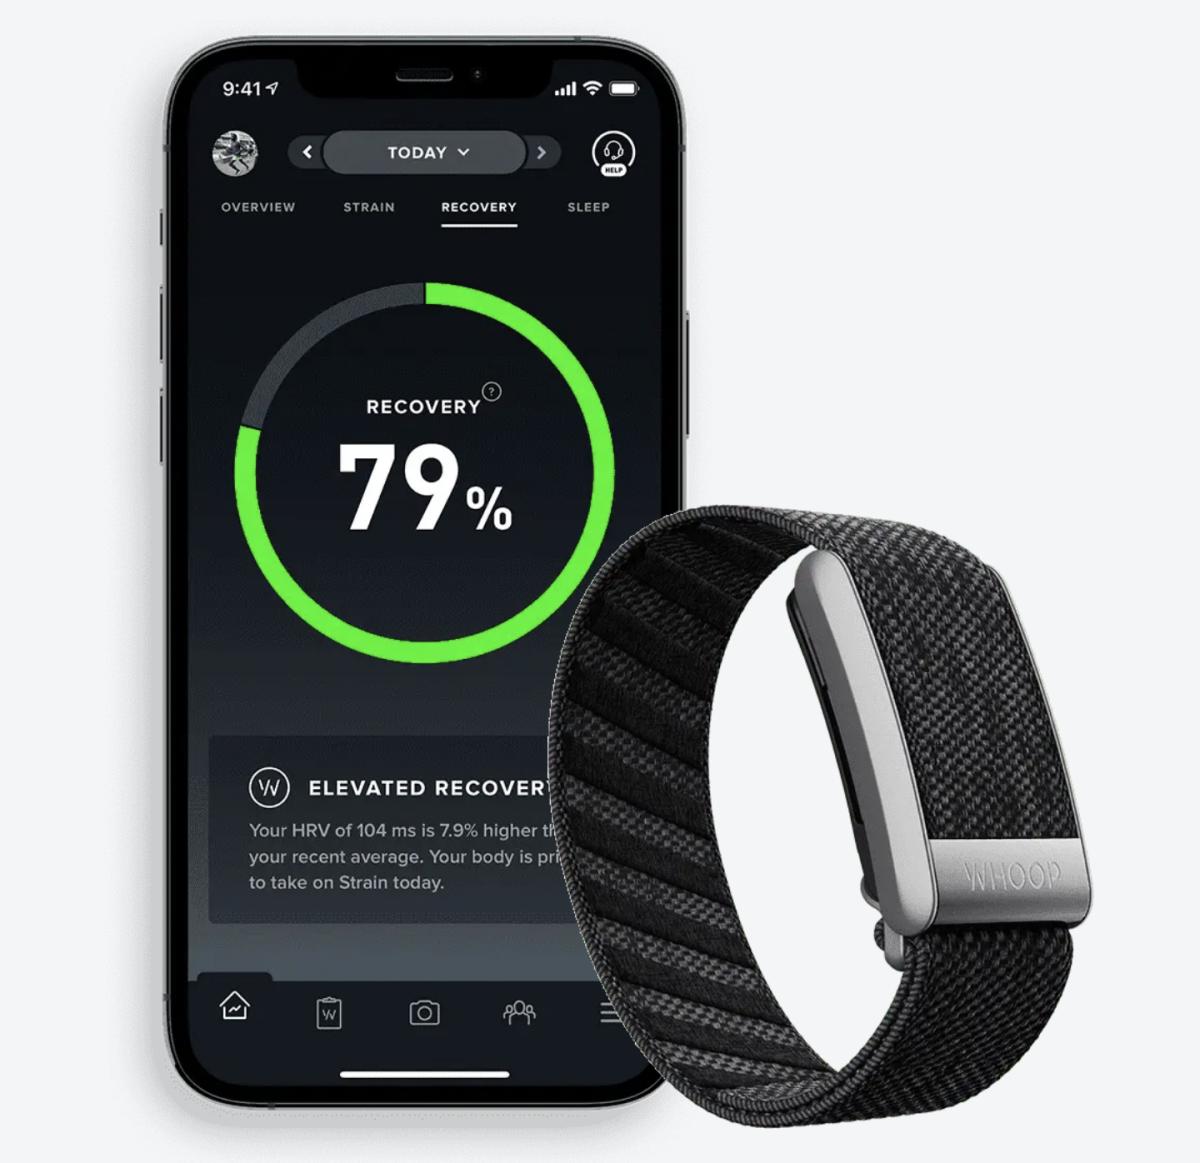 A phone with the WHOOP 4.0 app open next to the WHOOP wristband